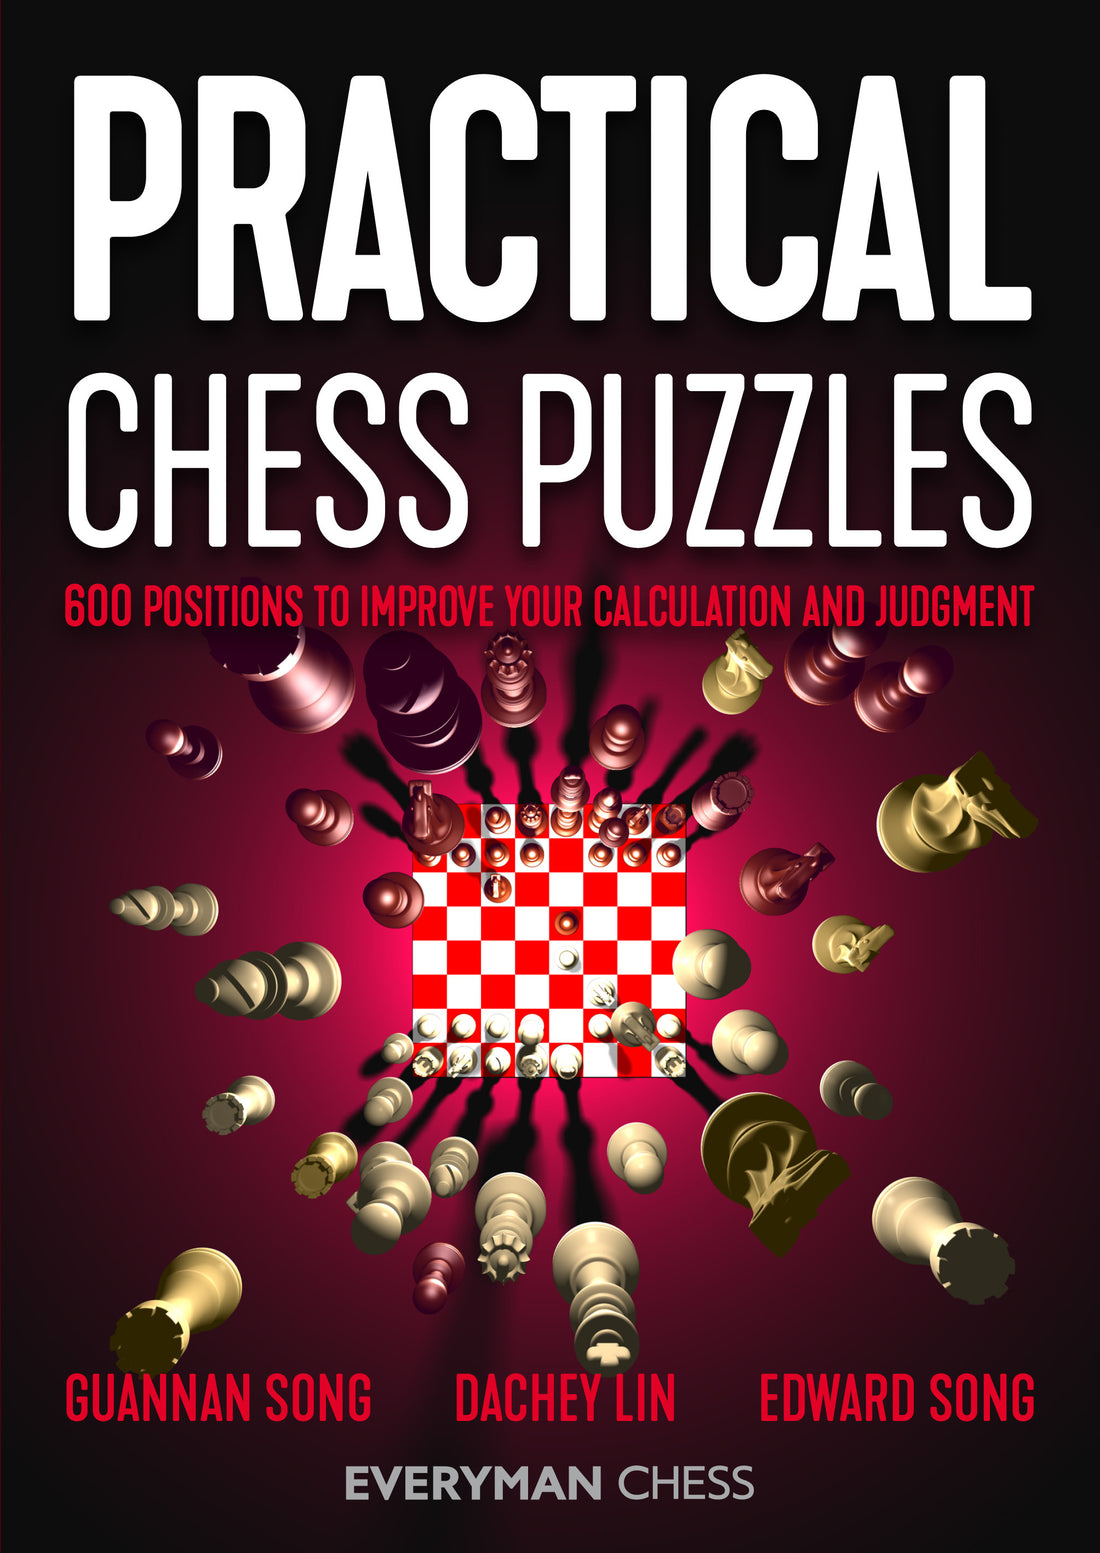 Practical Chess Puzzles: 600 Positions to Improve Your Calculation and Judgment